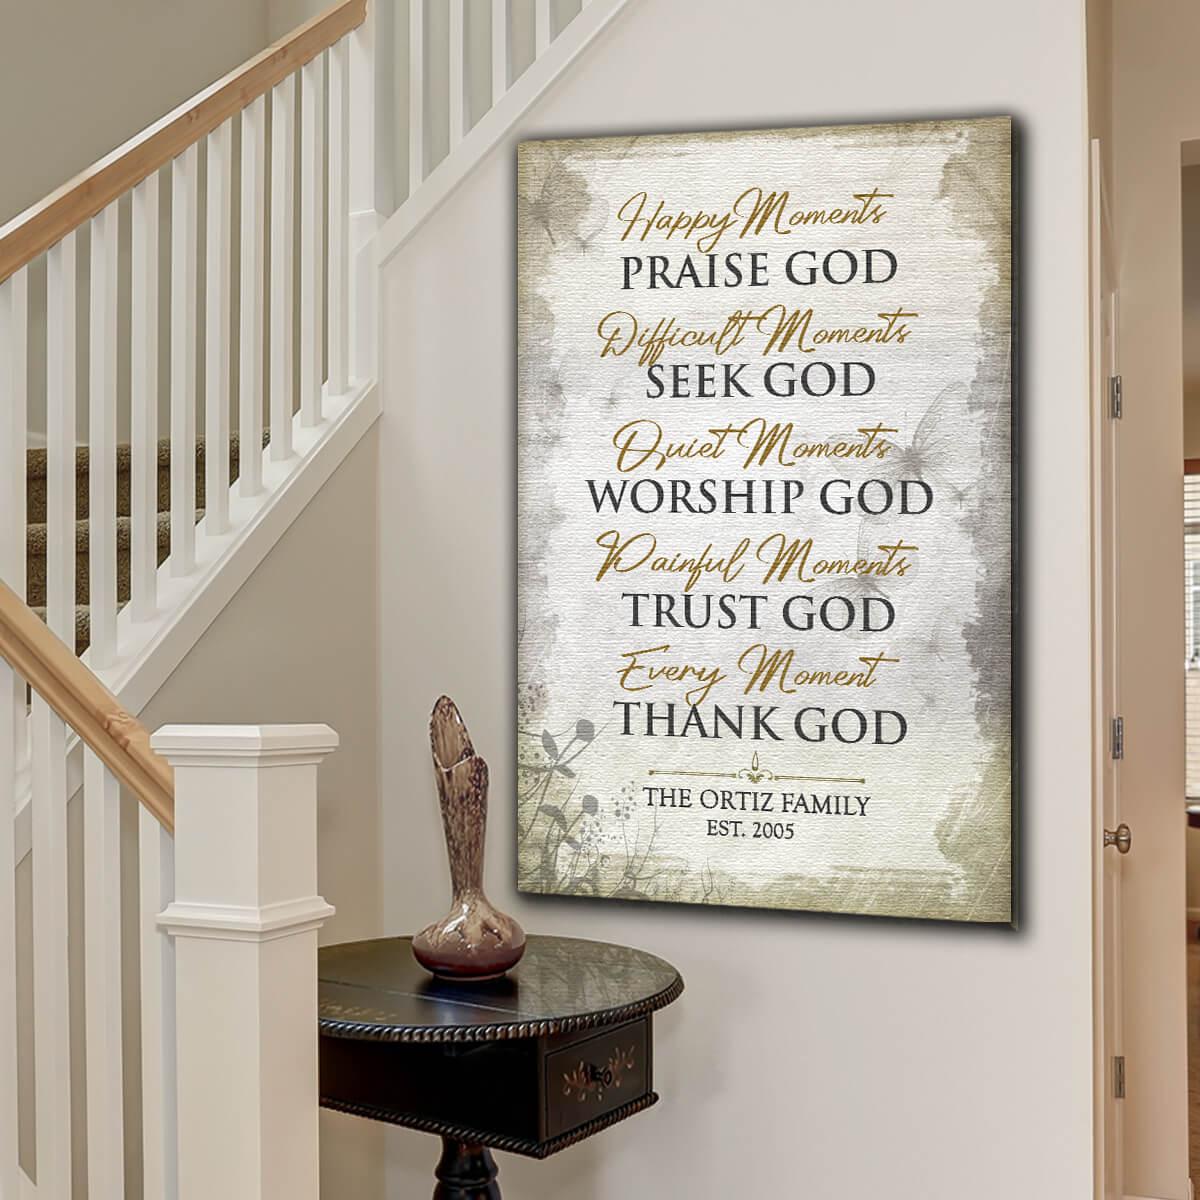 Personalized "Family Name - Every Moment, Thank God" Canvas Wall Art